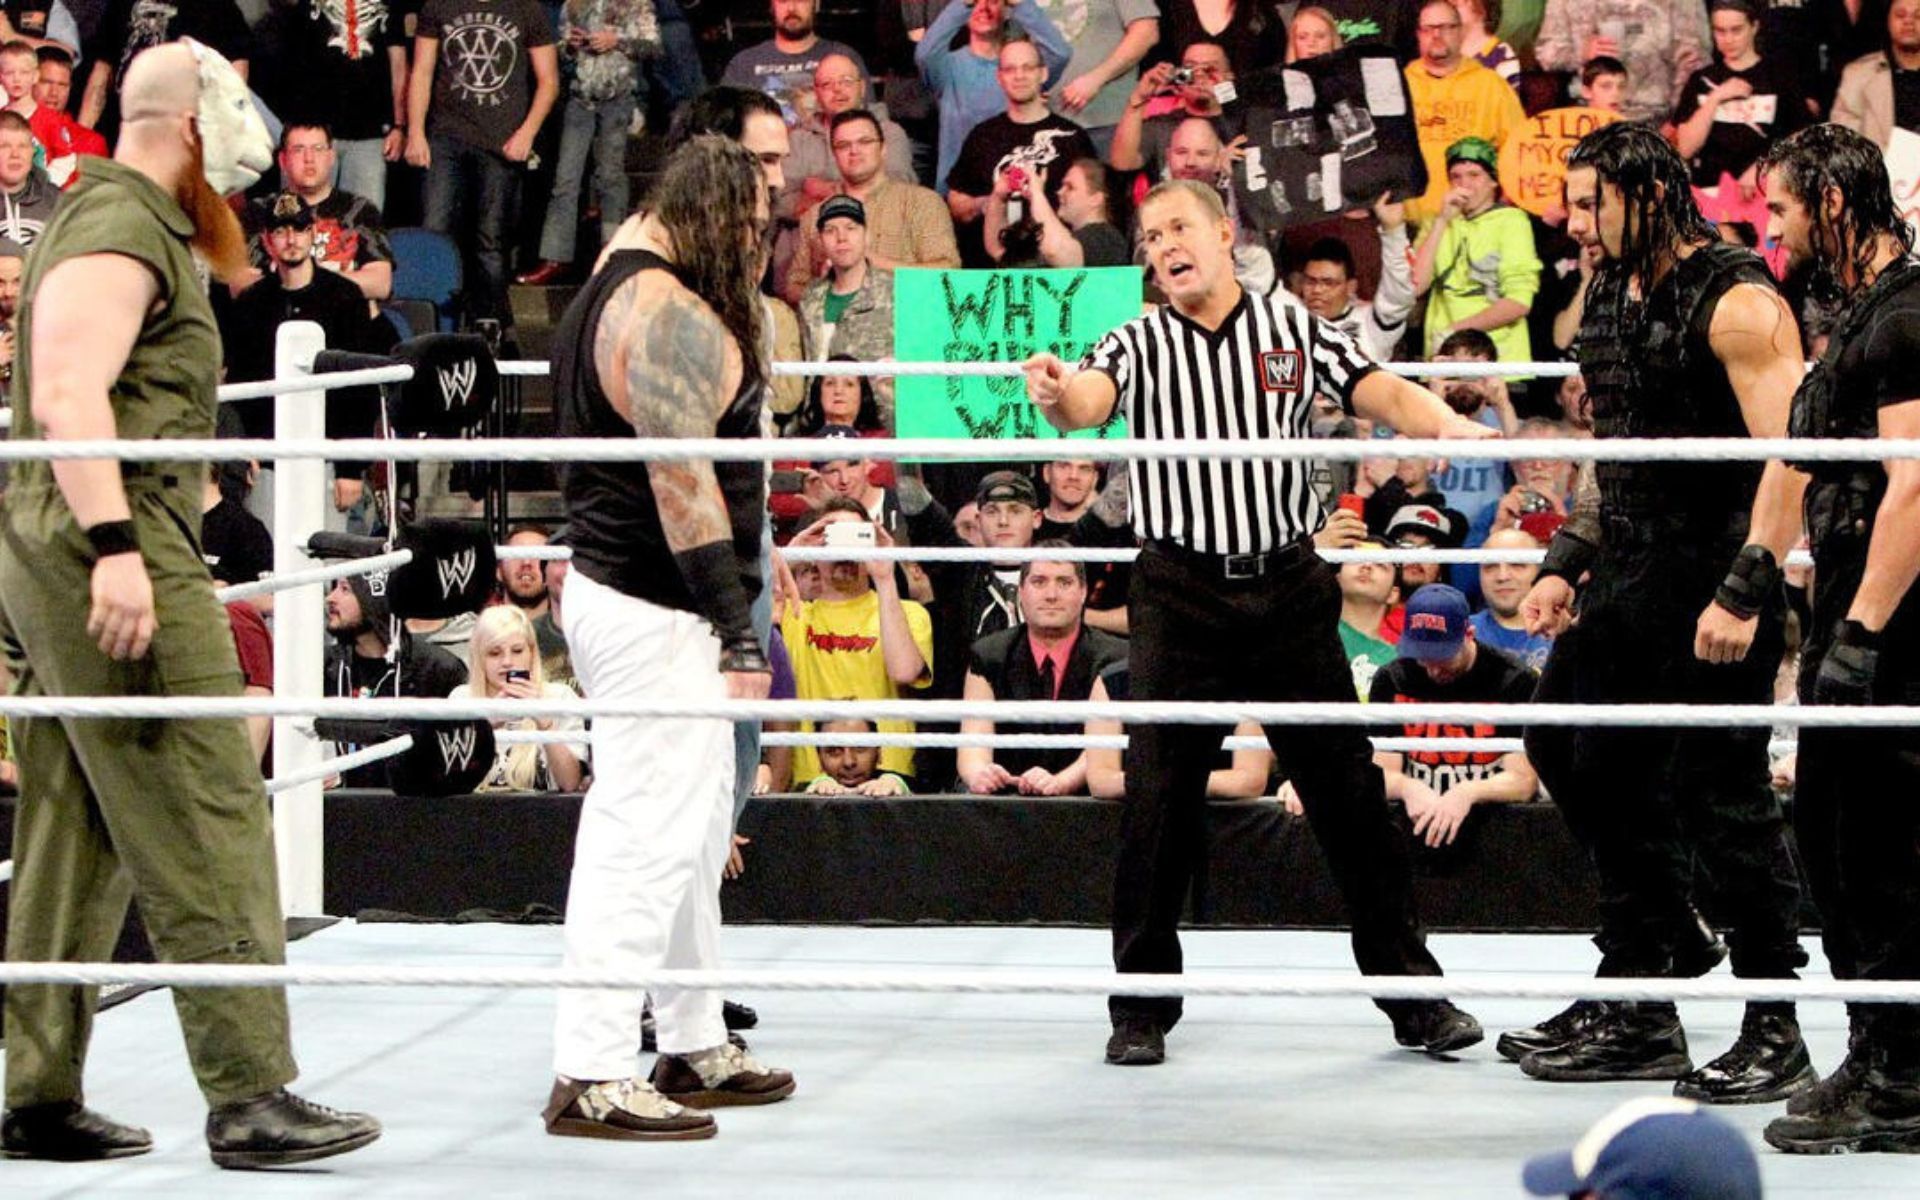 The Wyatt Family and The SHIELD created some epic memories!